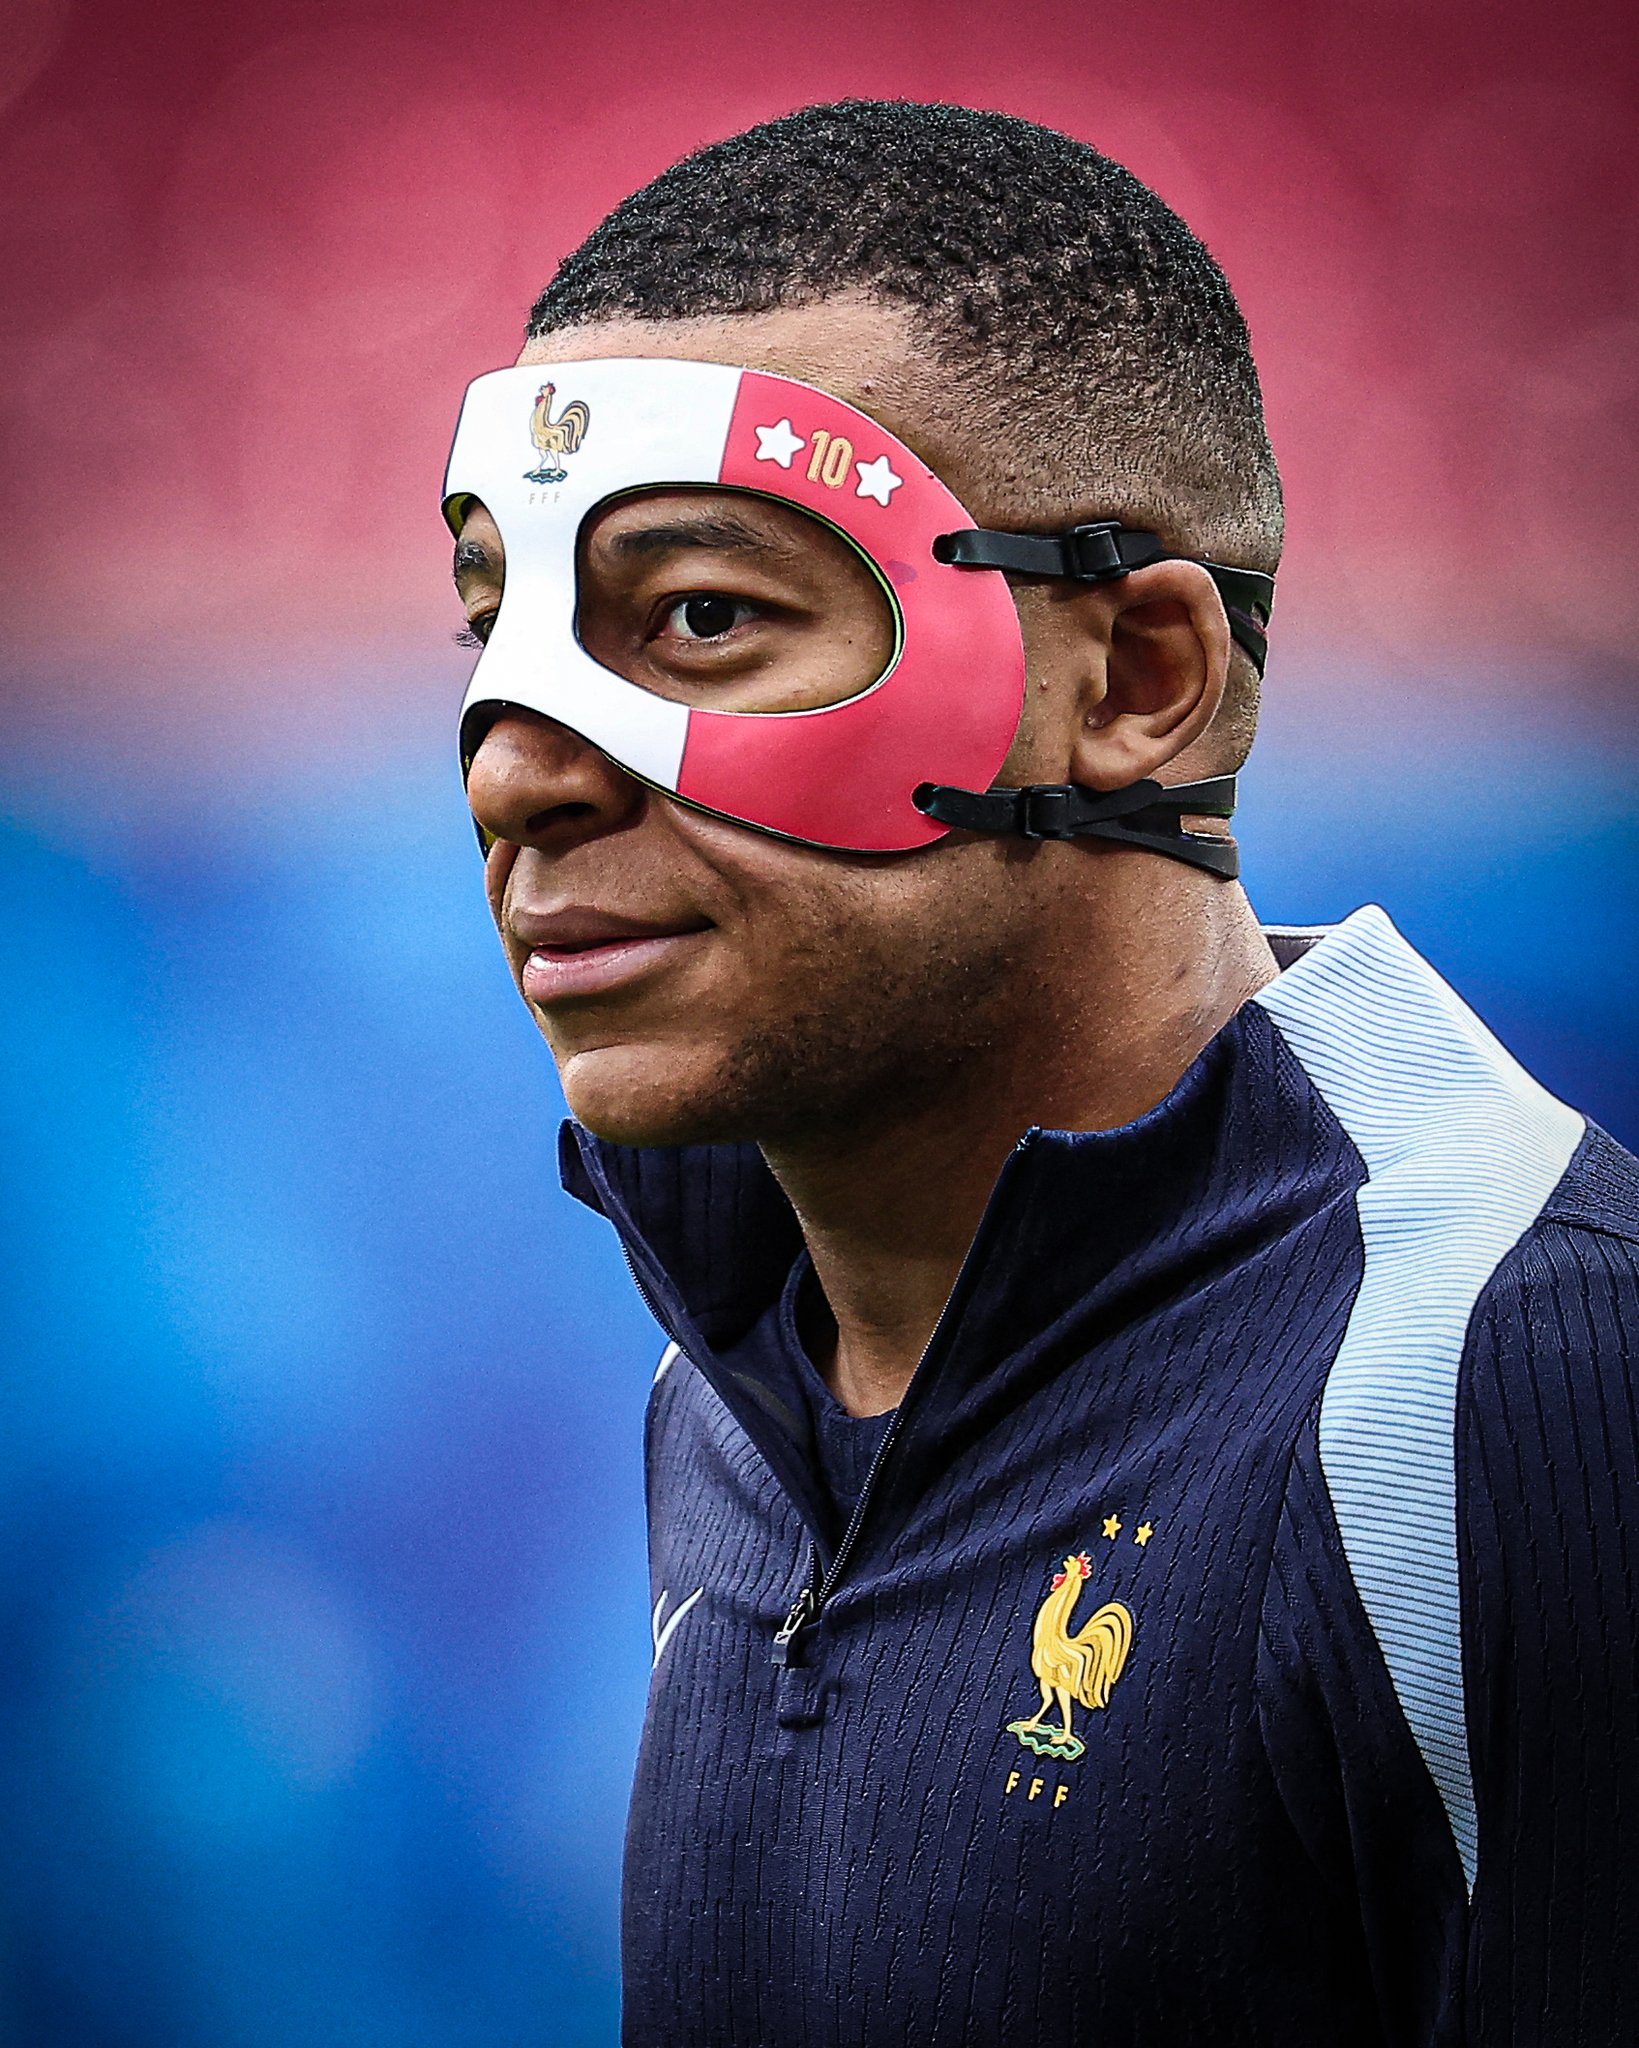 France head coach, Didier Deschamps has confirmed that Kylian Mbappe is feeling better and will play against the Netherlands on Friday, June 21.